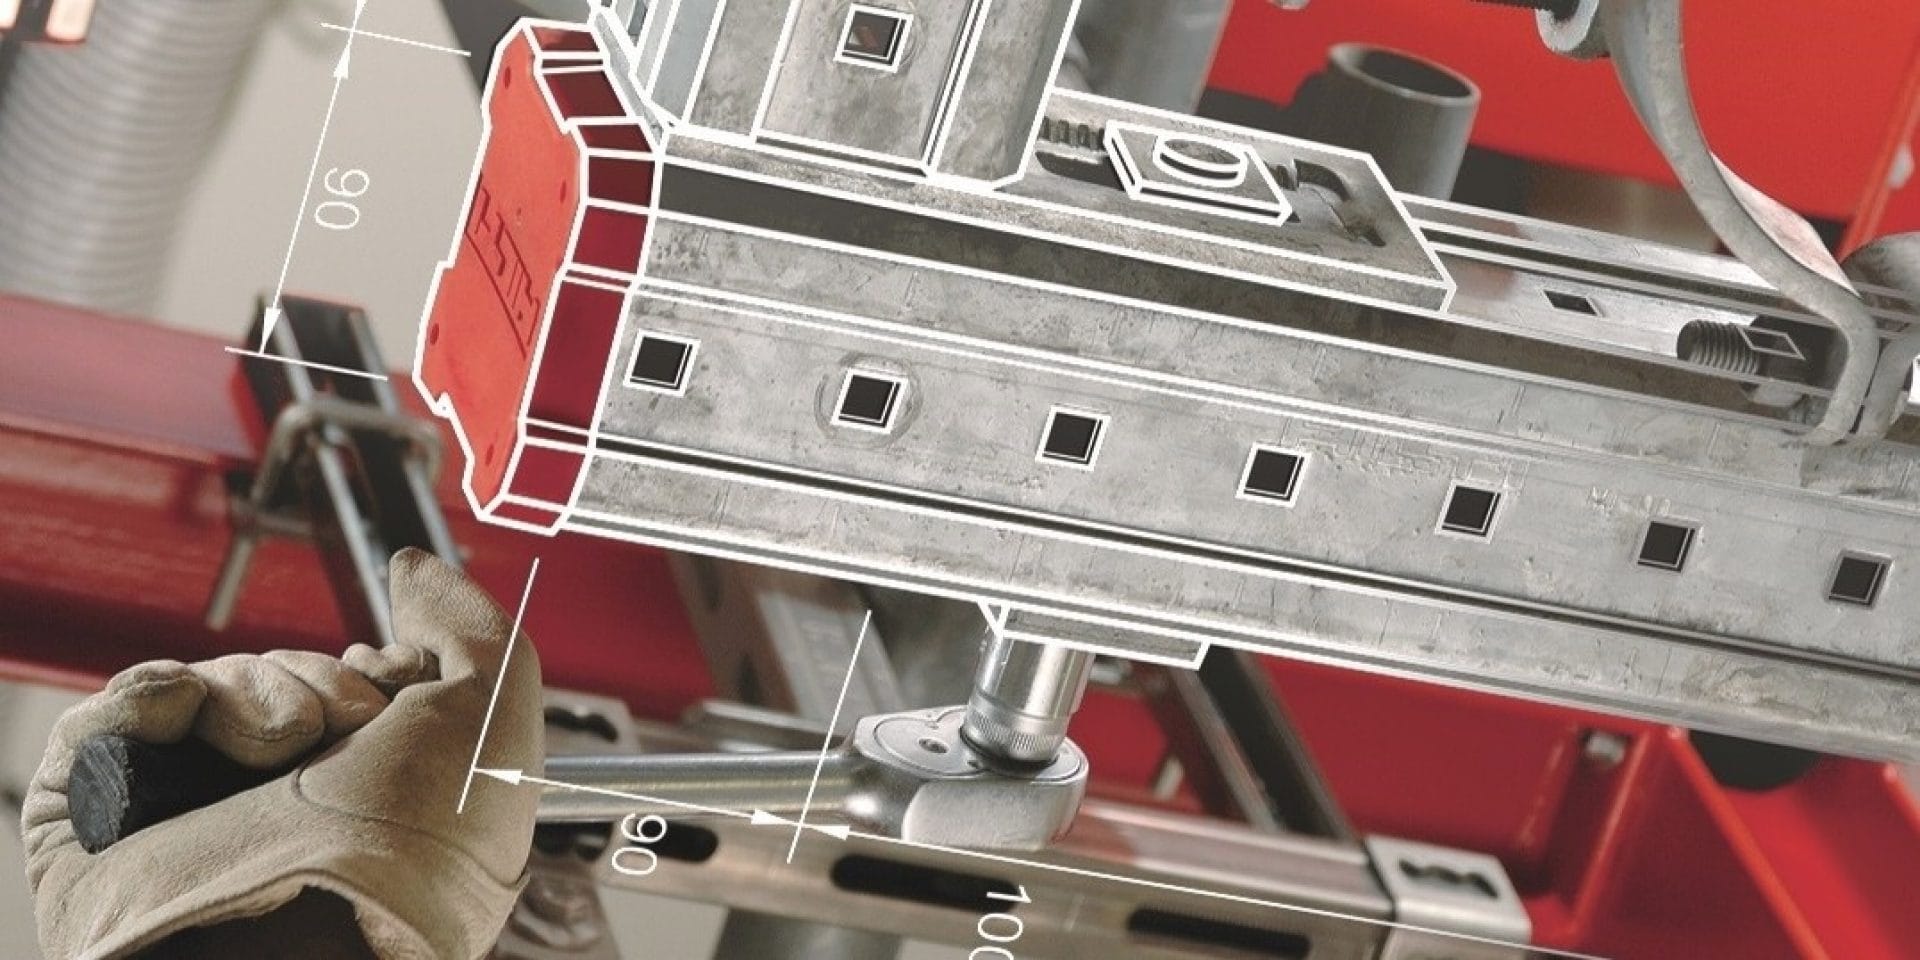 Hilti PROFIS Installation software for modular support systems